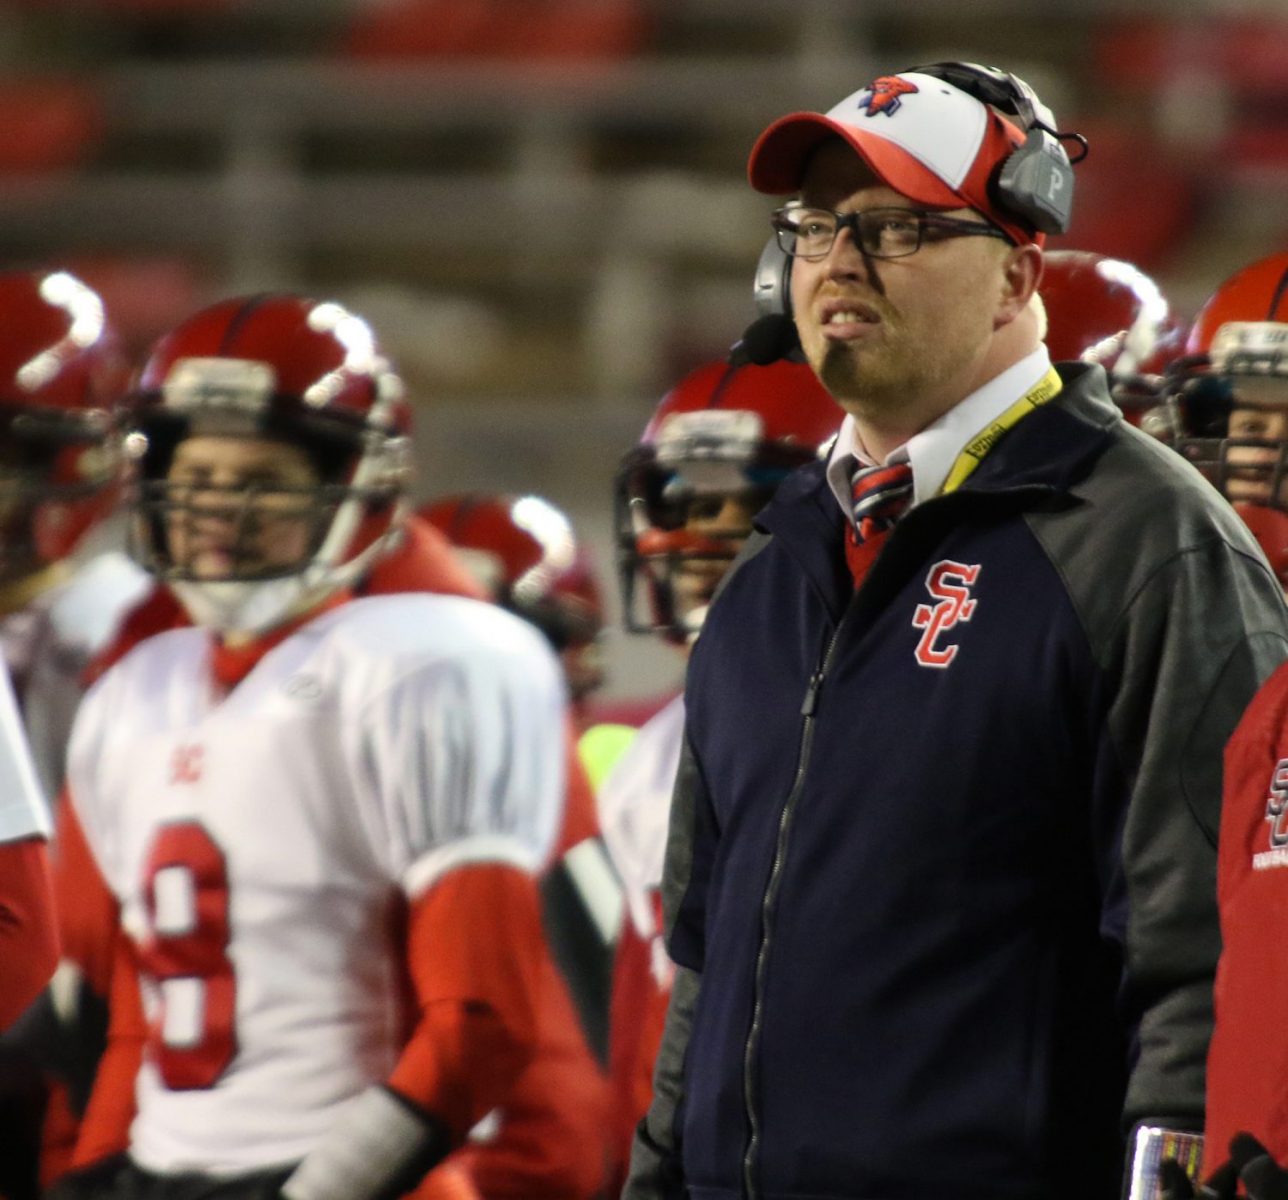 Spencer/Columbus coach Jason Gorst watches the action in the third quarter as the Rockets lost to Amherst 42-0 in the WIAA Division 5 State Championship Game at Camp Randall Stadium in Madison, Thursday, Nov. 19, 2015.